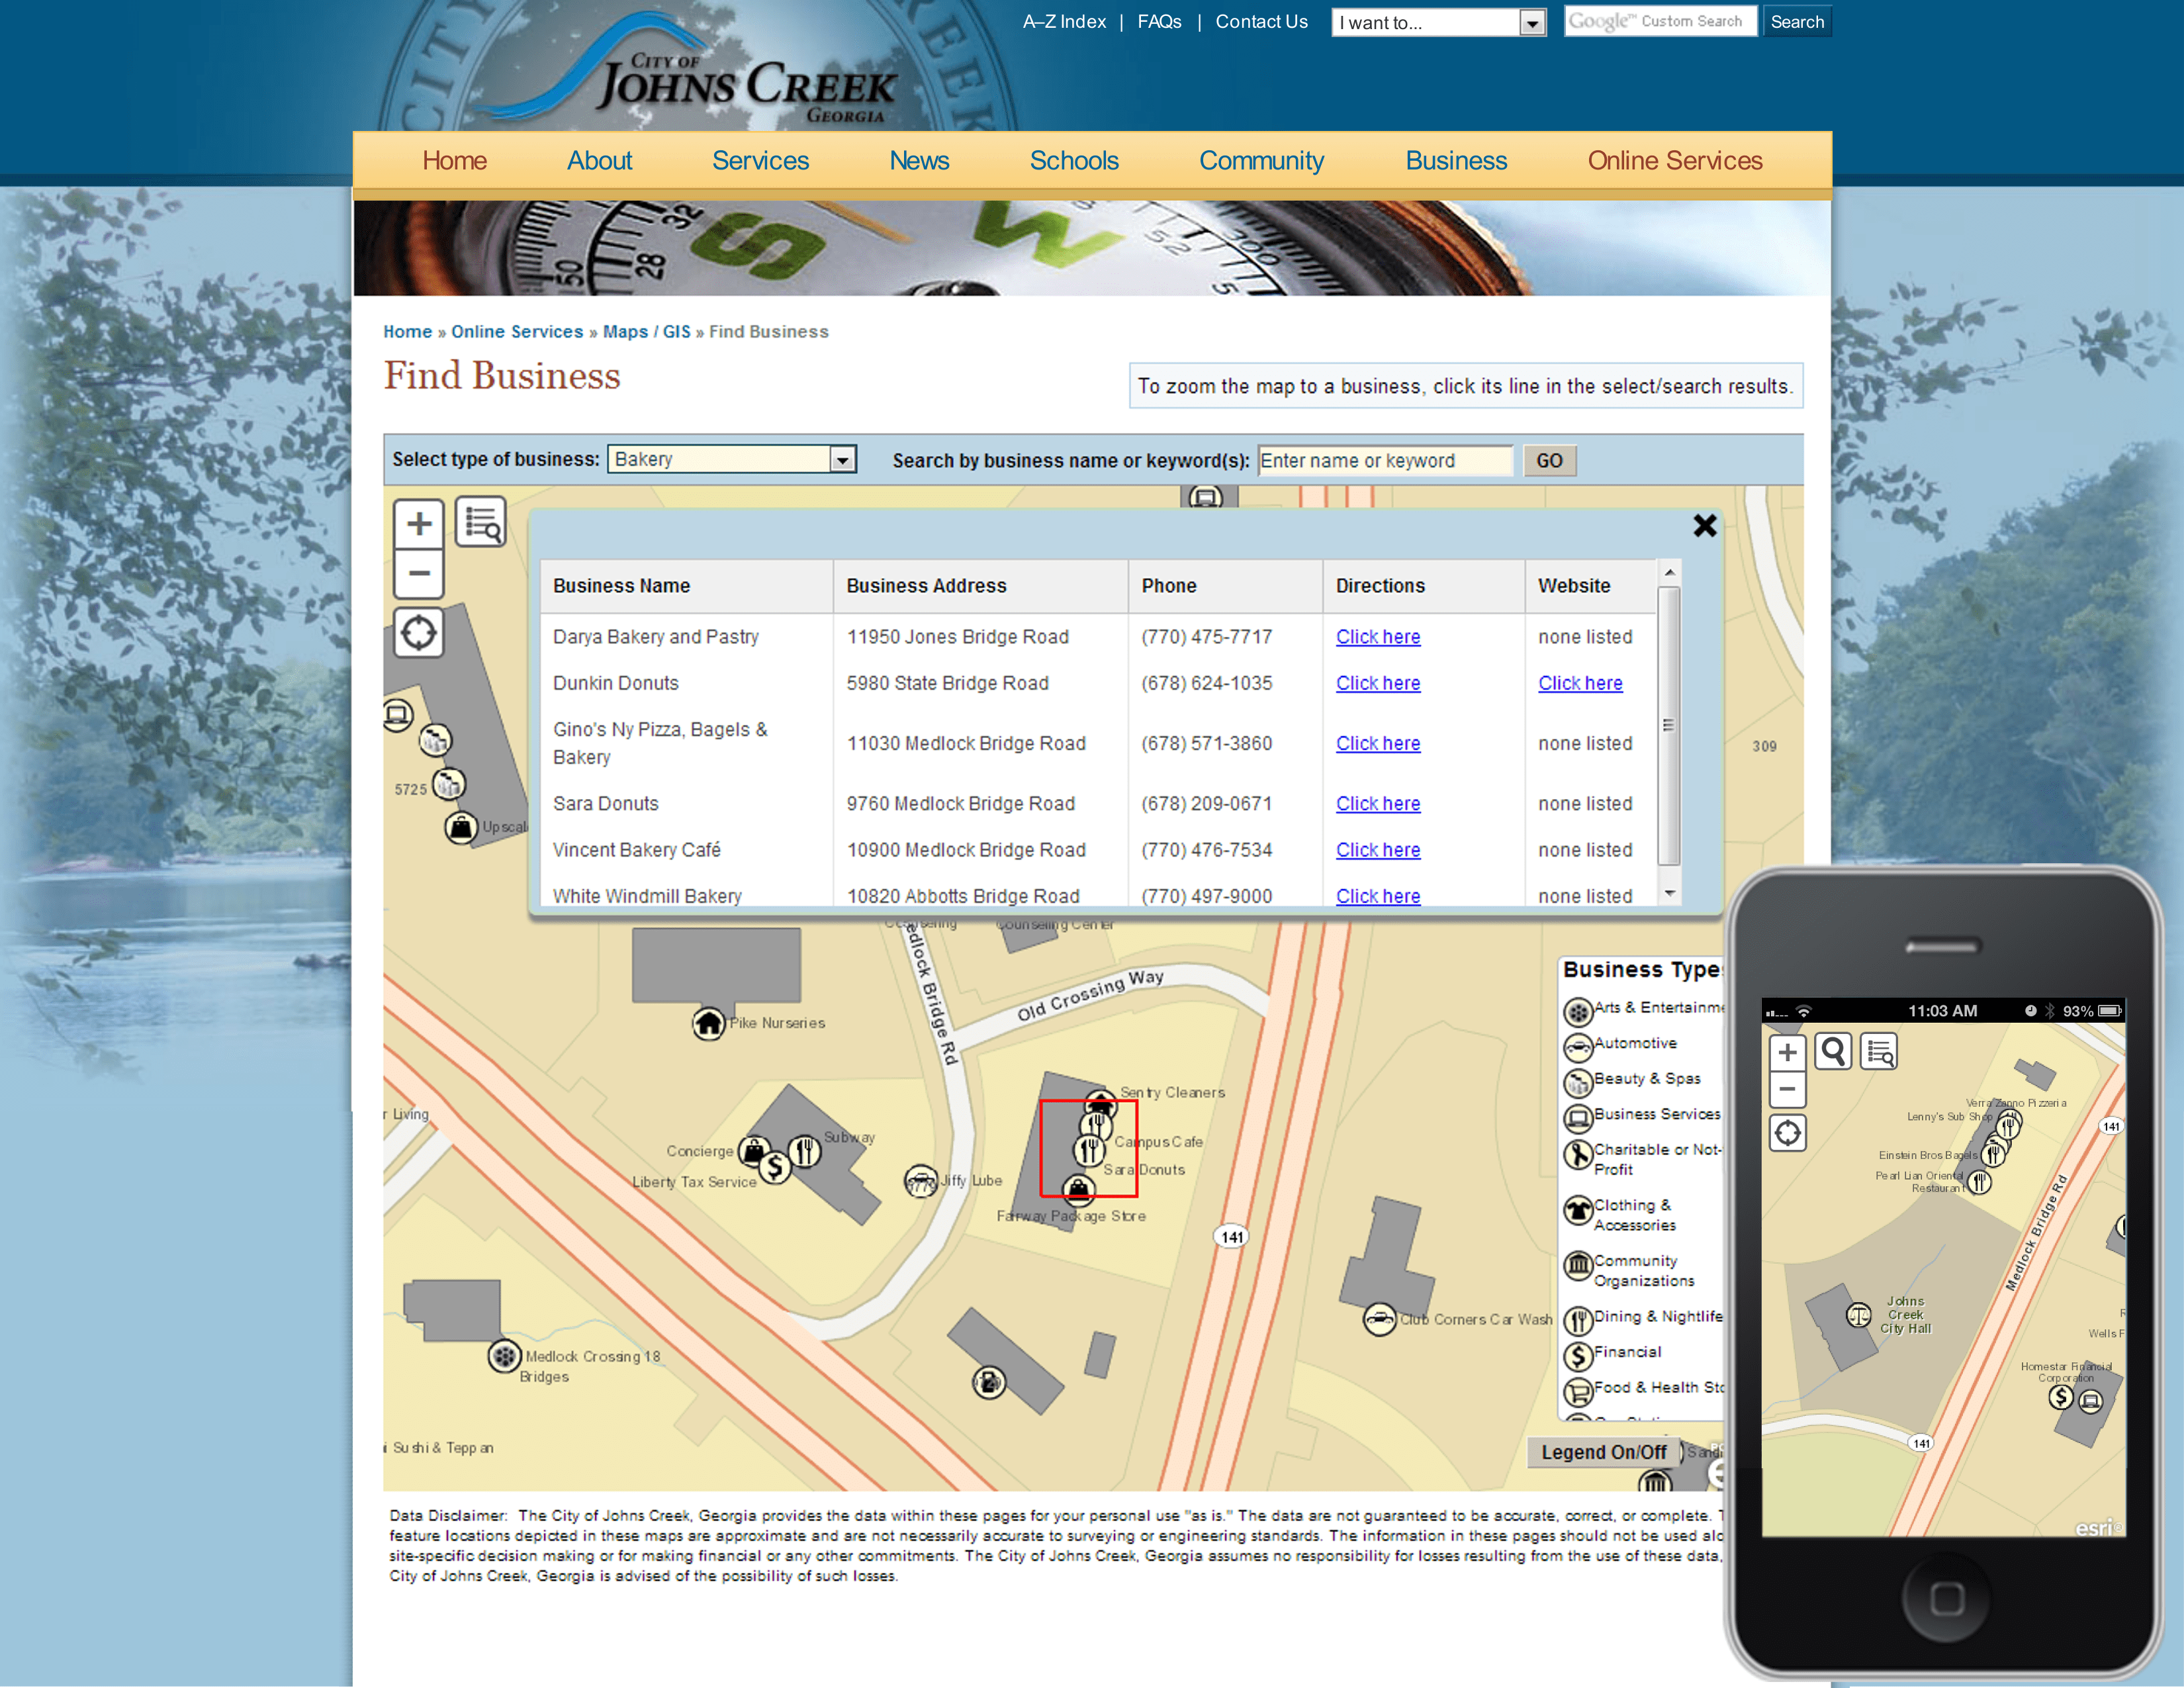 The City of Johns Creek, GA’s “Find Business” map (shown on a desktop and on an iPhone) offers users the ability to search for, and patronize, businesses within the city limits. This app supports the city’s efforts to encourage Johns Creek residents and visitors to buy locally.